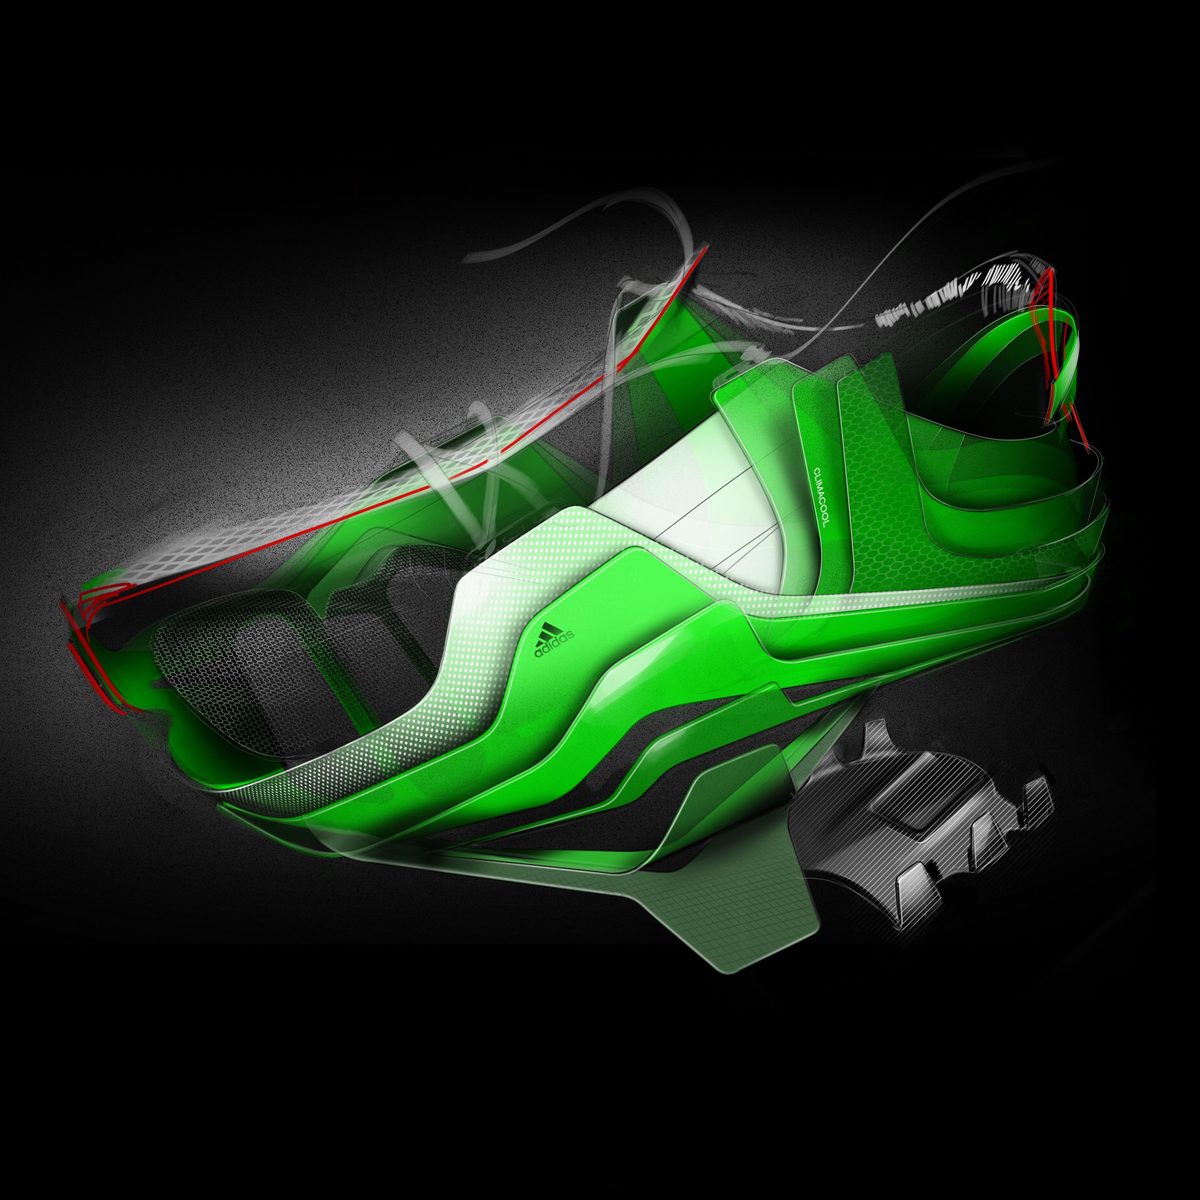 Exploded view of materials and structure of a lightweight shoe concept for adidas